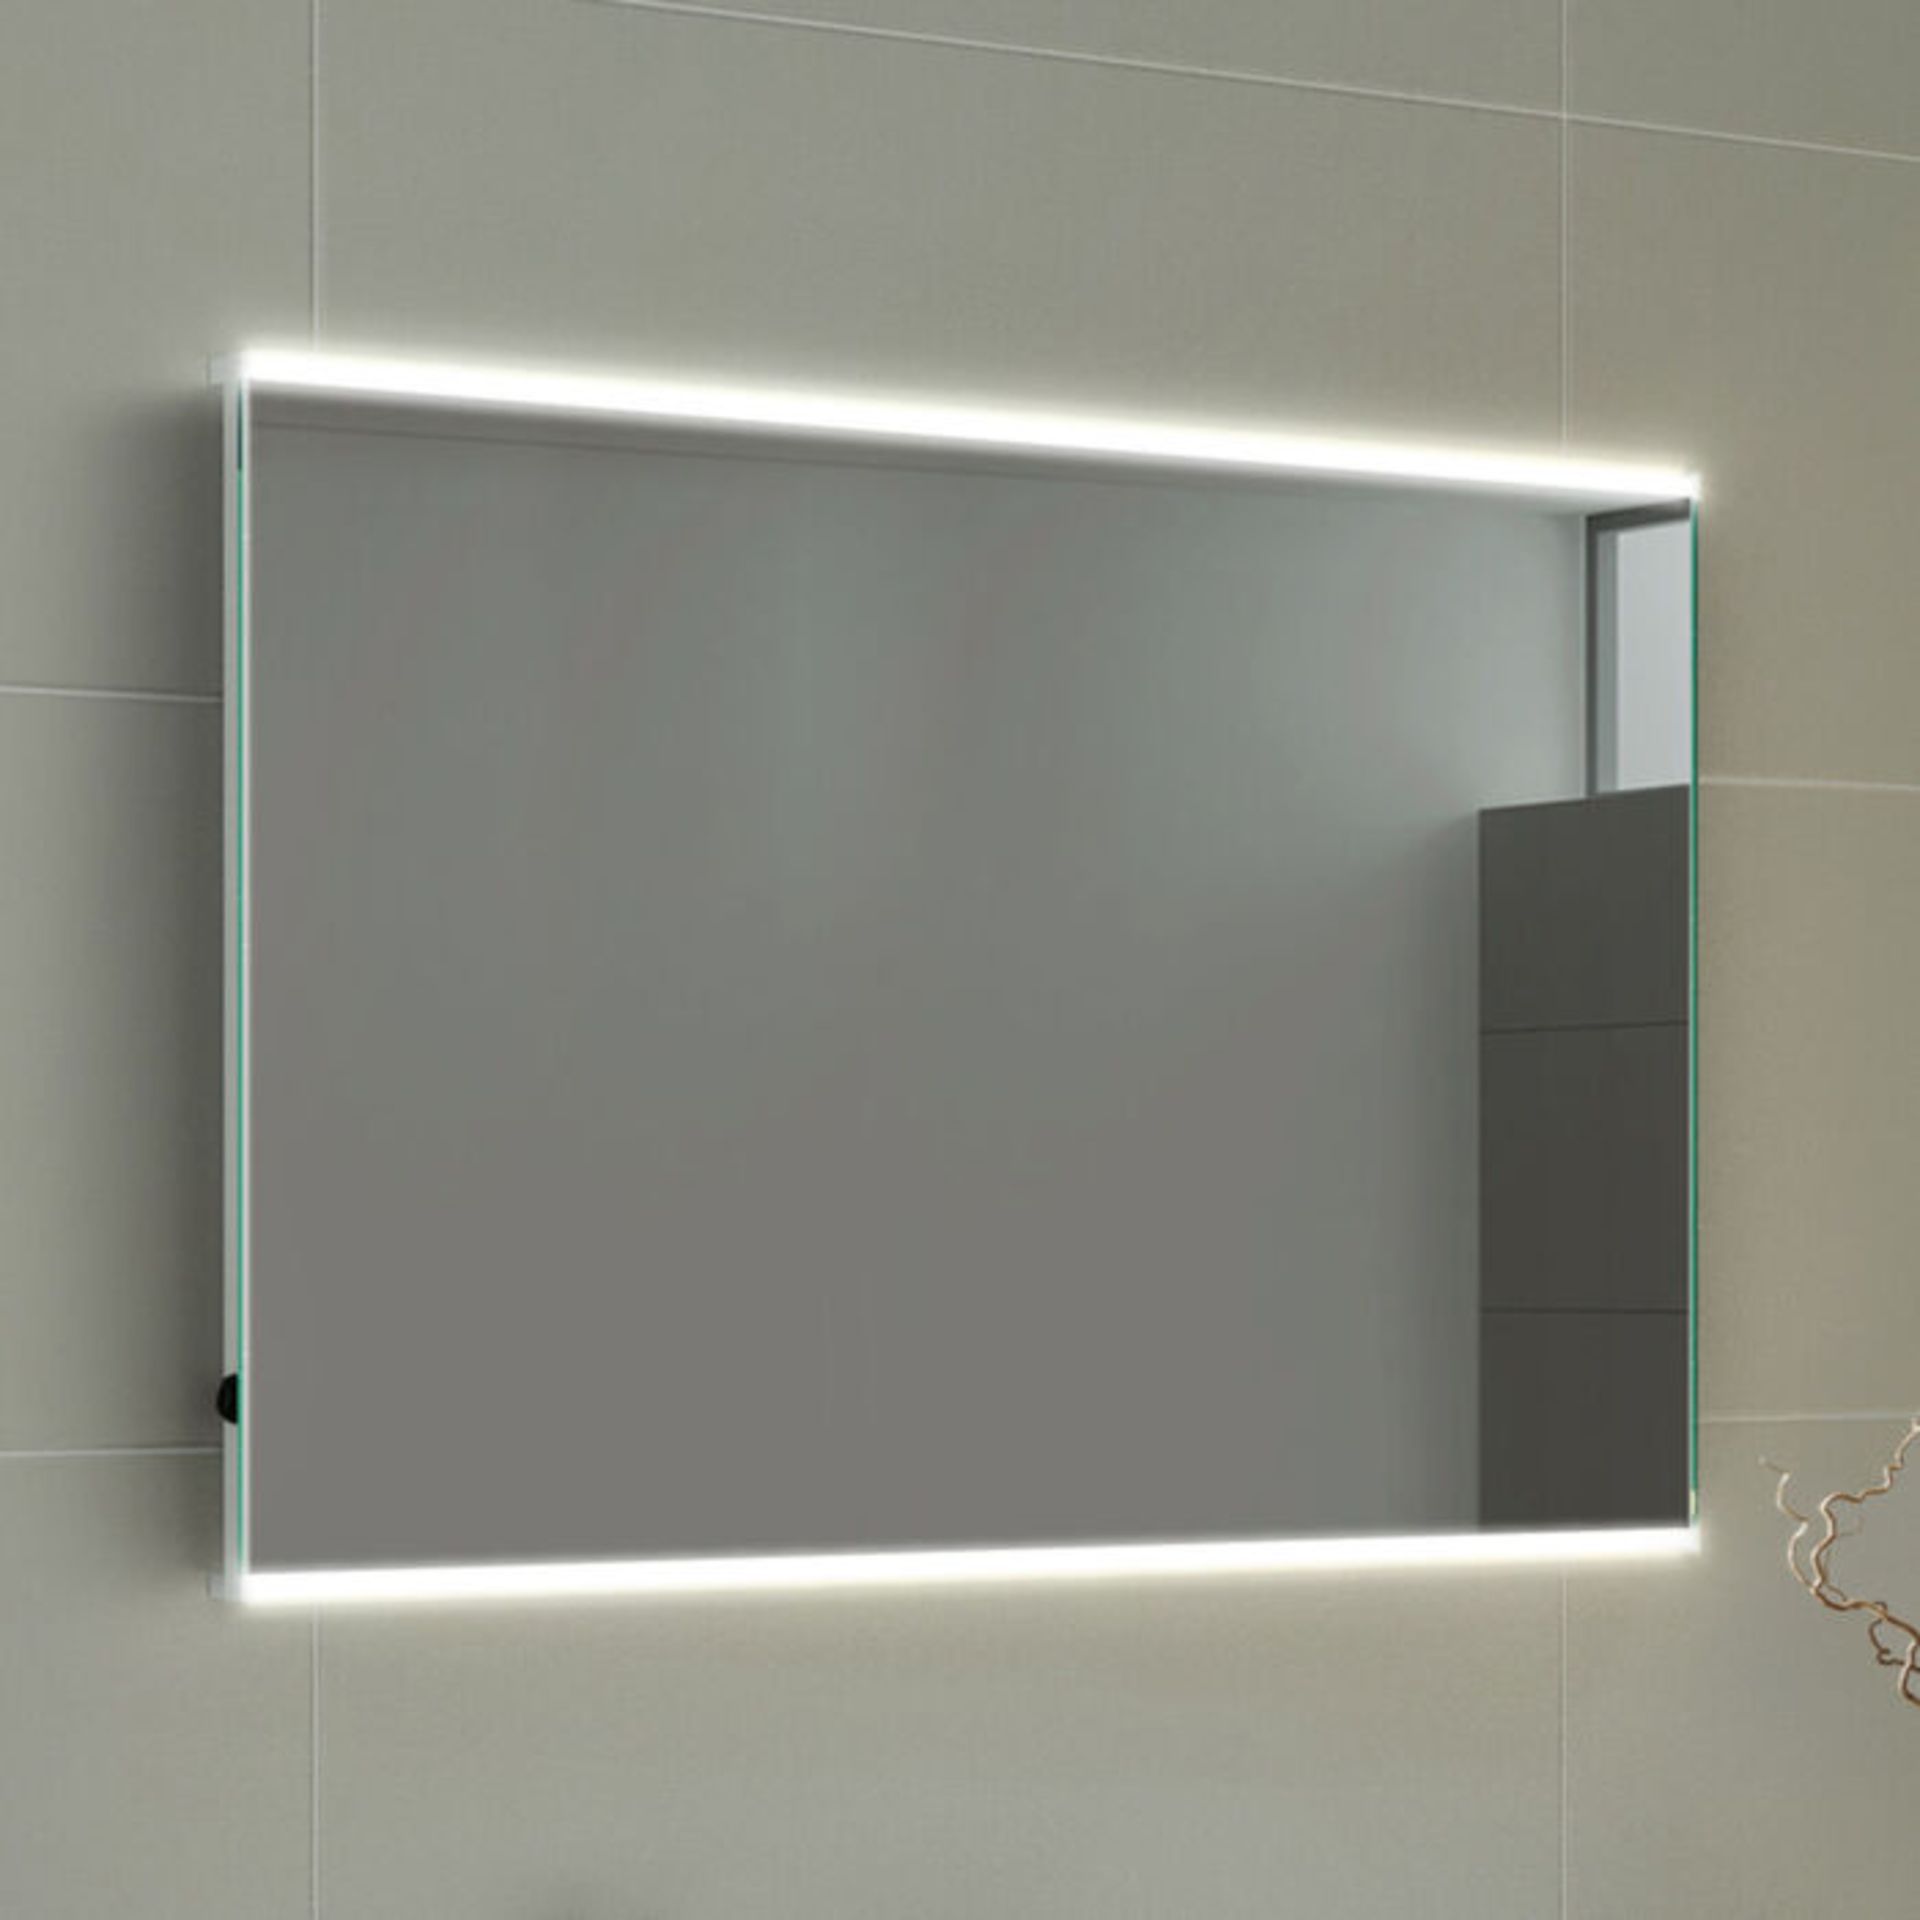 (RR26) 500x700mm Denver Illuminated LED Mirror - Battery Operated. RRP £299.99. Energy saving... ( - Image 2 of 4